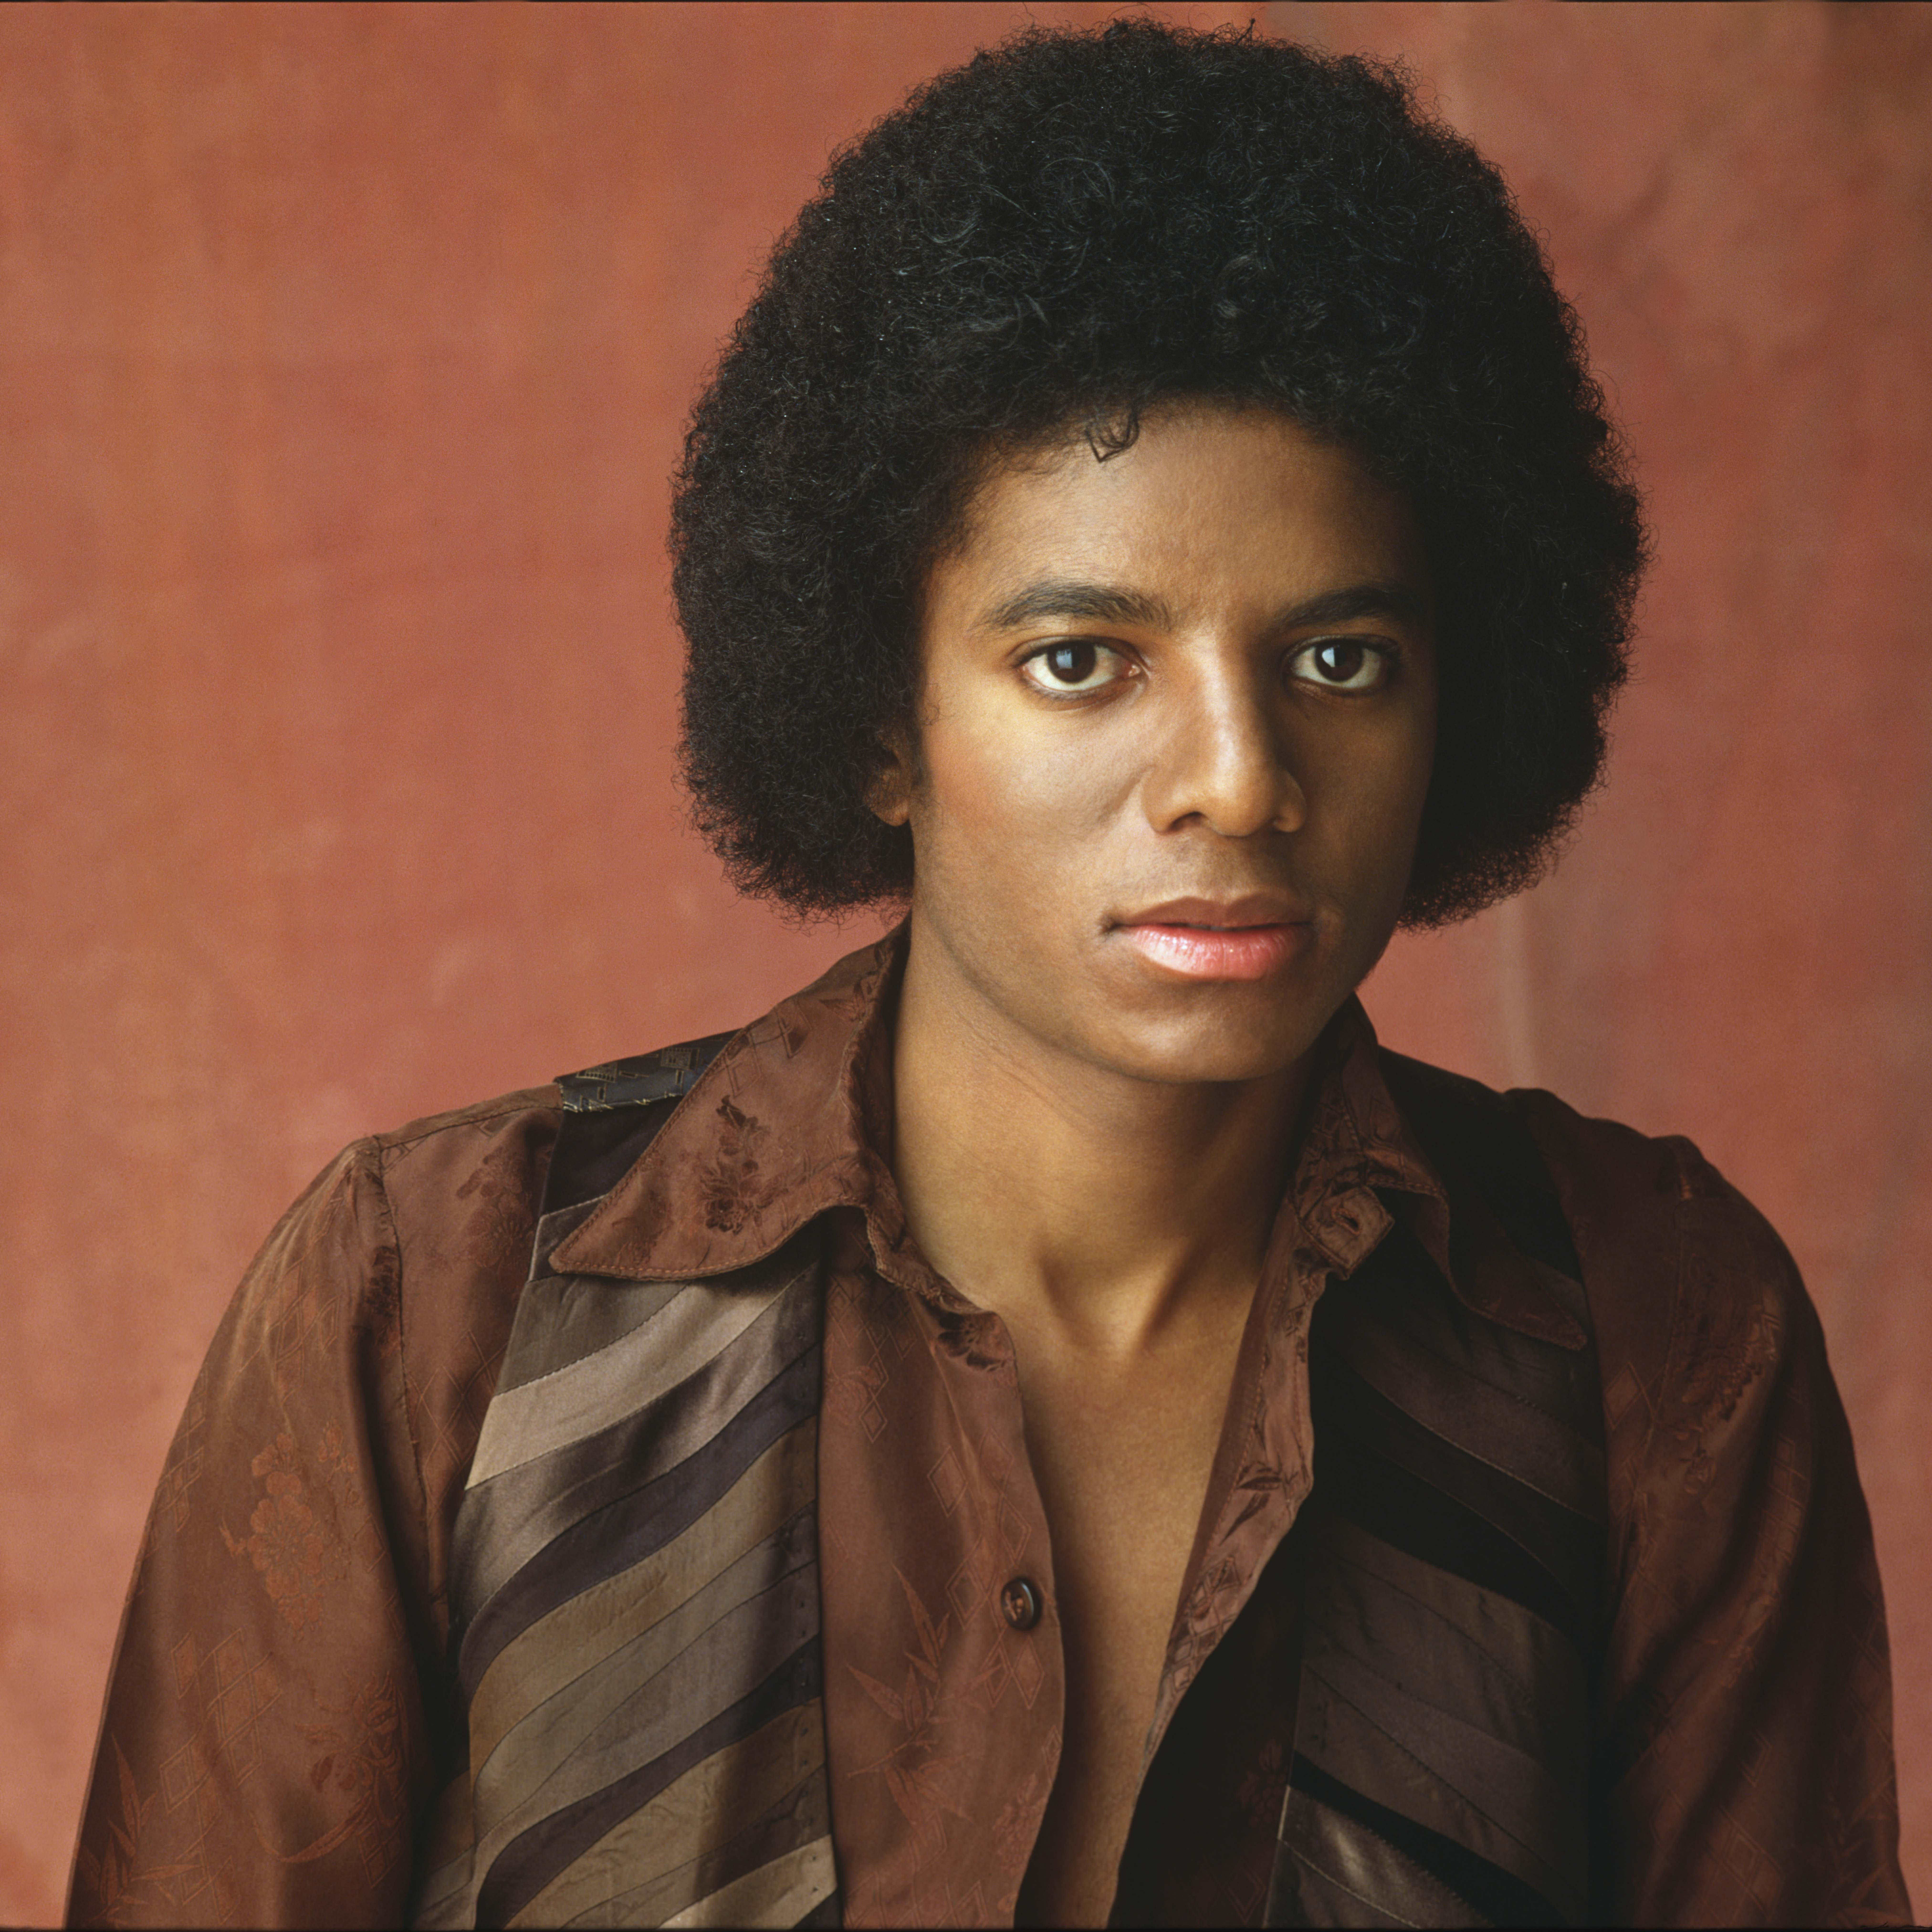 Off The Wall: 15 Photos Of Michael Jackson To Celebrate His Birthday